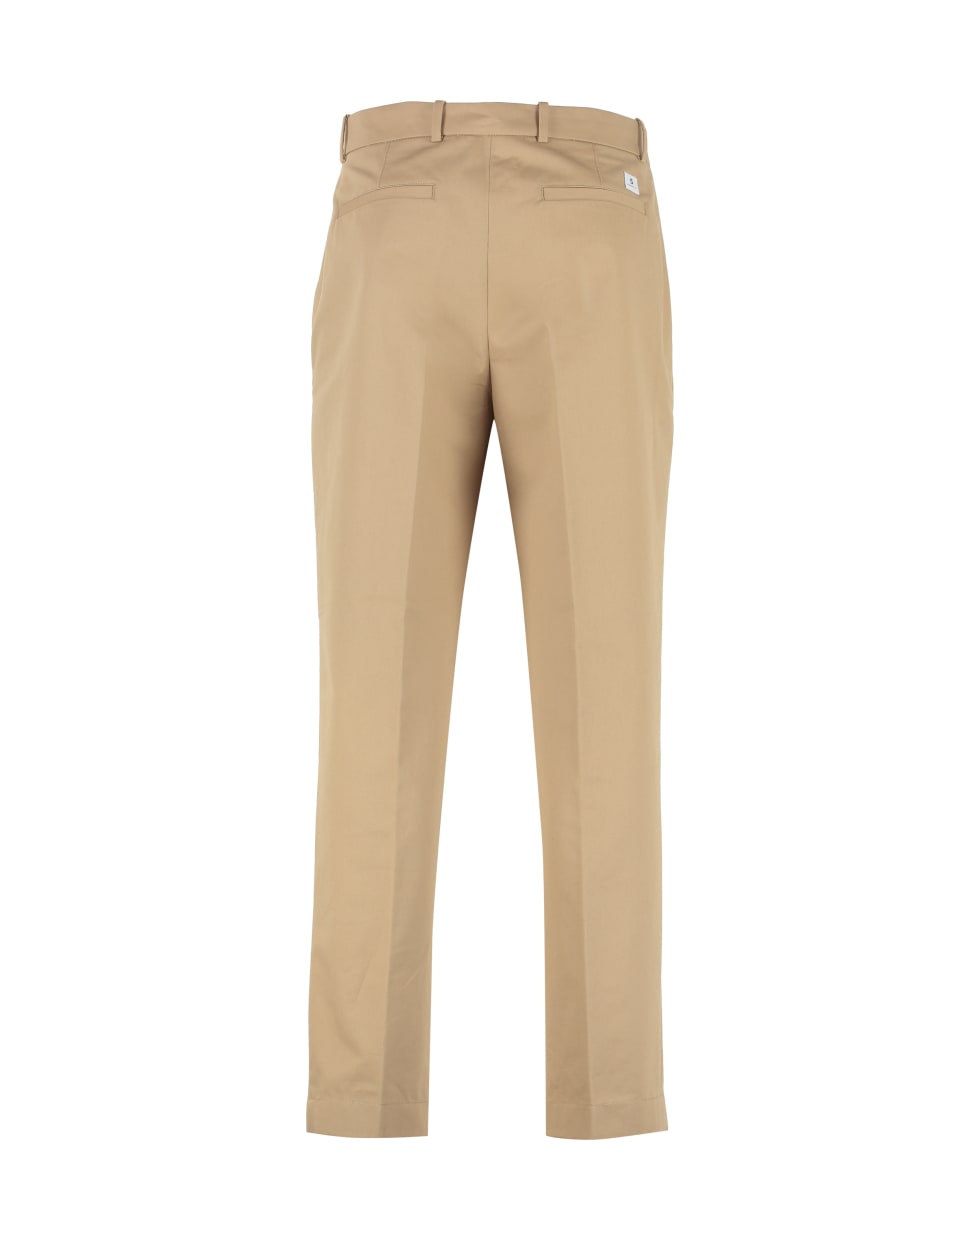 Department Five Yang Cotton Chino Trousers - Beige